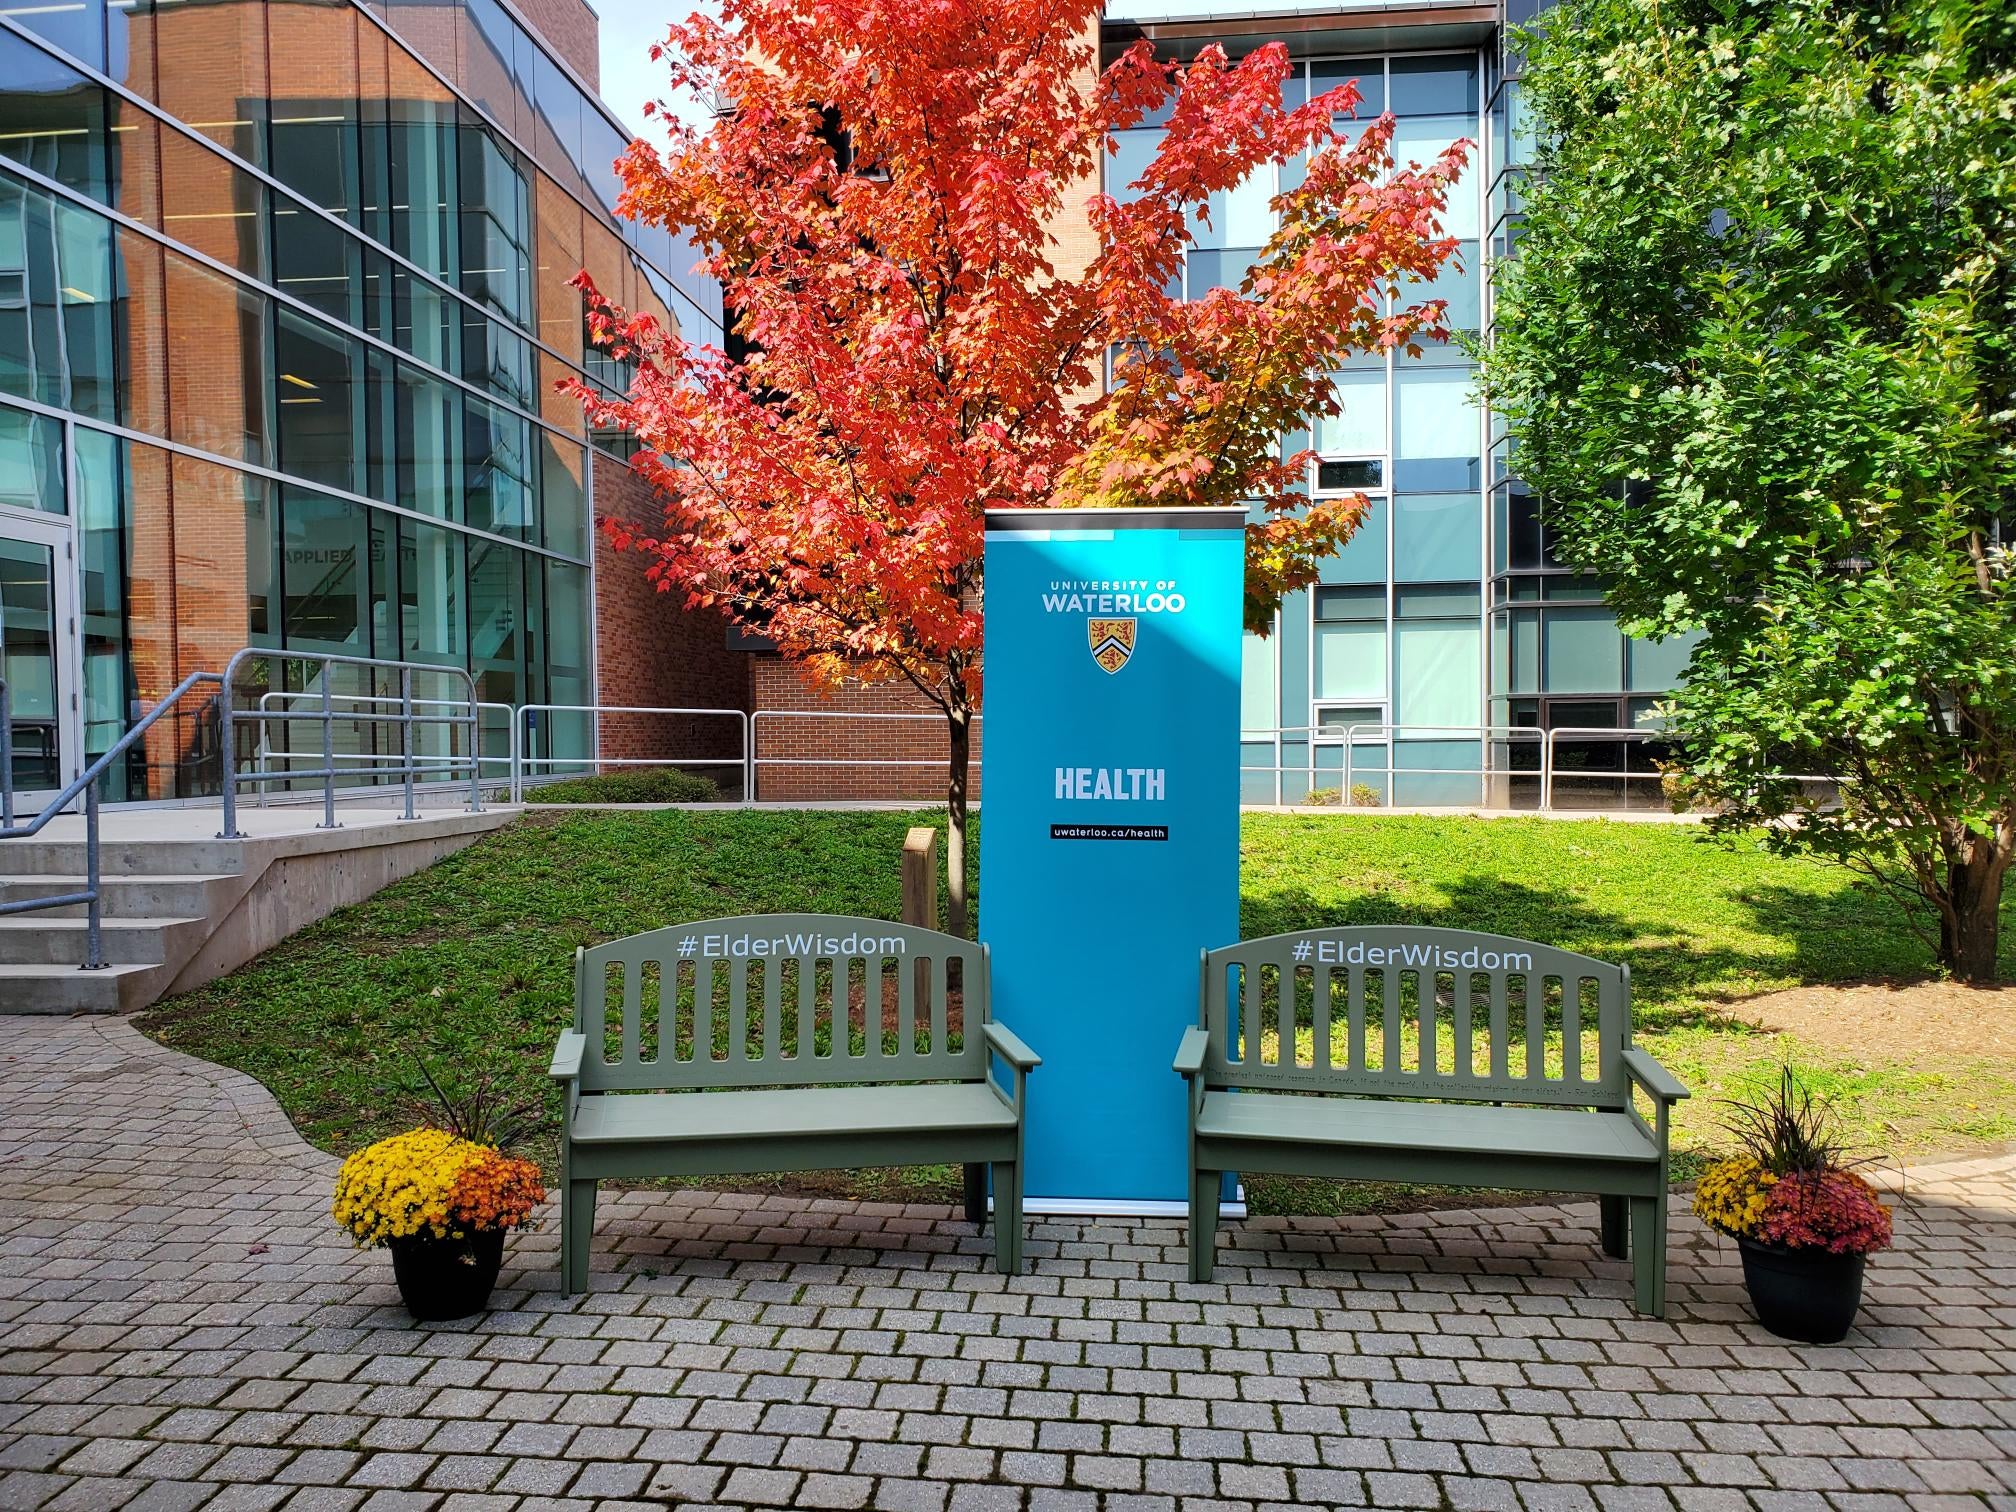 Elder wisdom benches in the BMH courtyard with a Health banner in between.